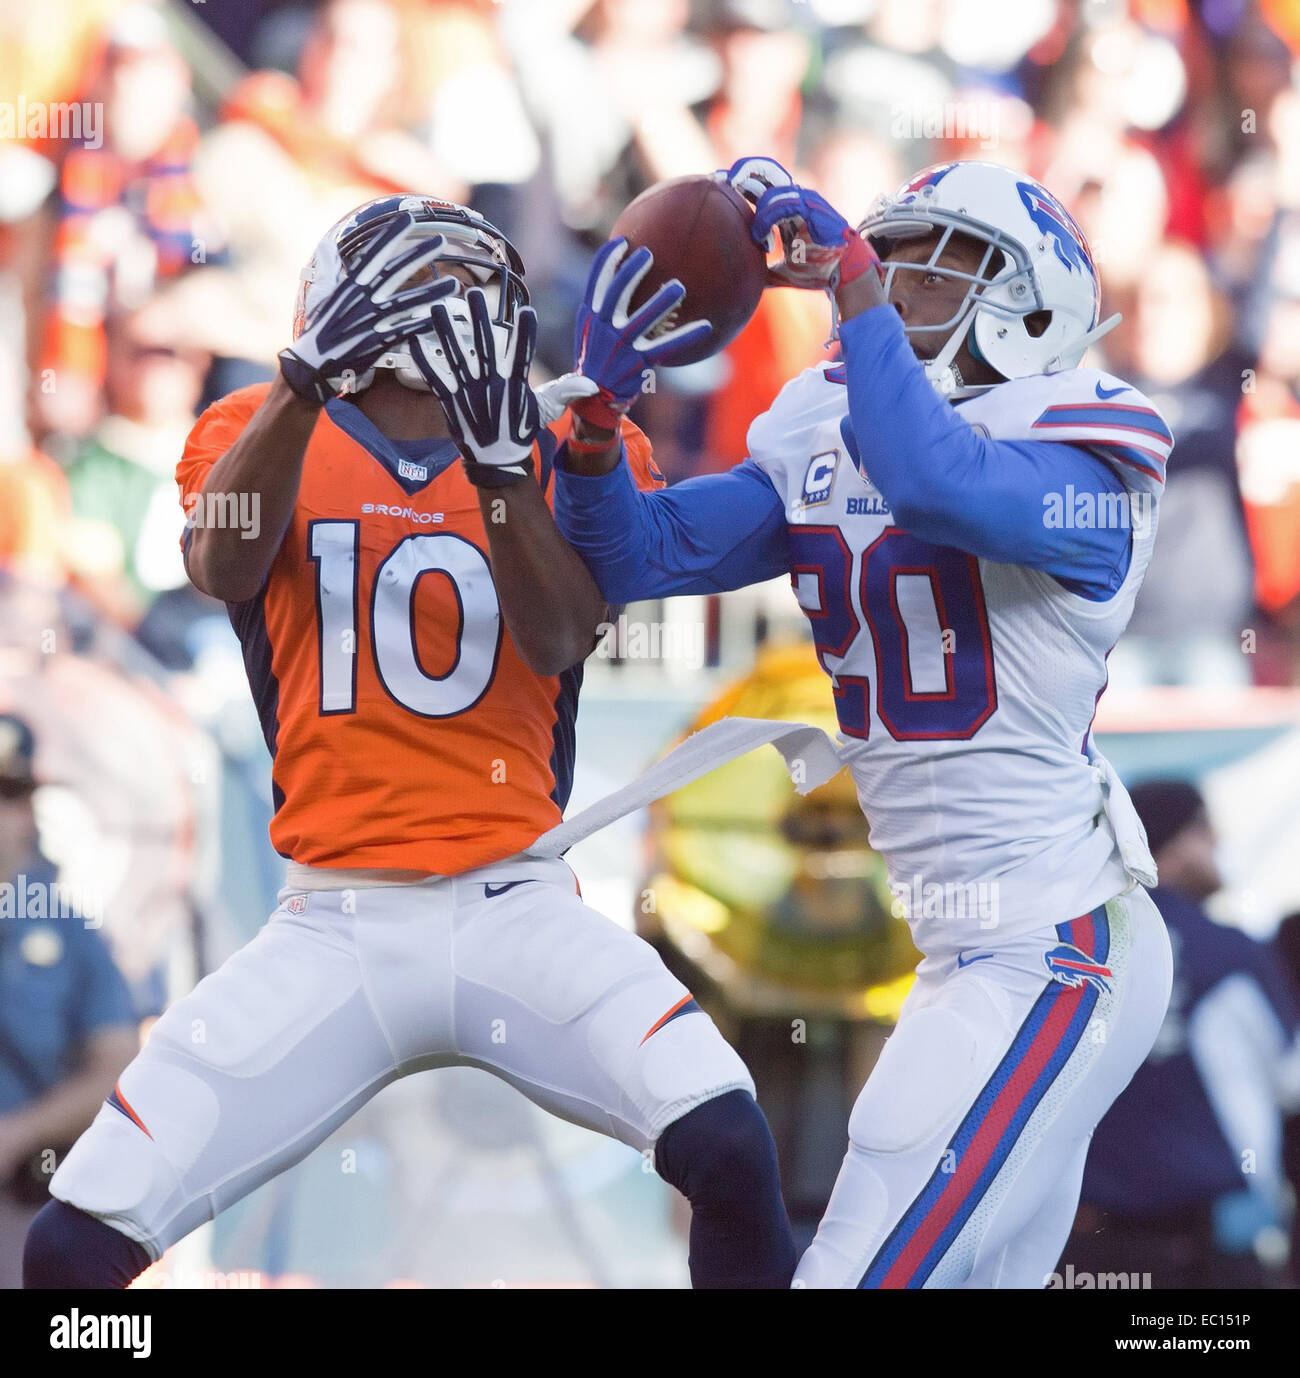 Denver, Colorado, USA. 7th Dec, 2014. Broncos WR EMMANUEL SANDERS, left, battles with Bills CB COREY GRAHAM, right, after the ball is intercepted during the 1st. Half at Sports Authority Field at Mile High Sunday afternoon. The Broncos beat the Bills 24-17. Credit:  Hector Acevedo/ZUMA Wire/Alamy Live News Stock Photo